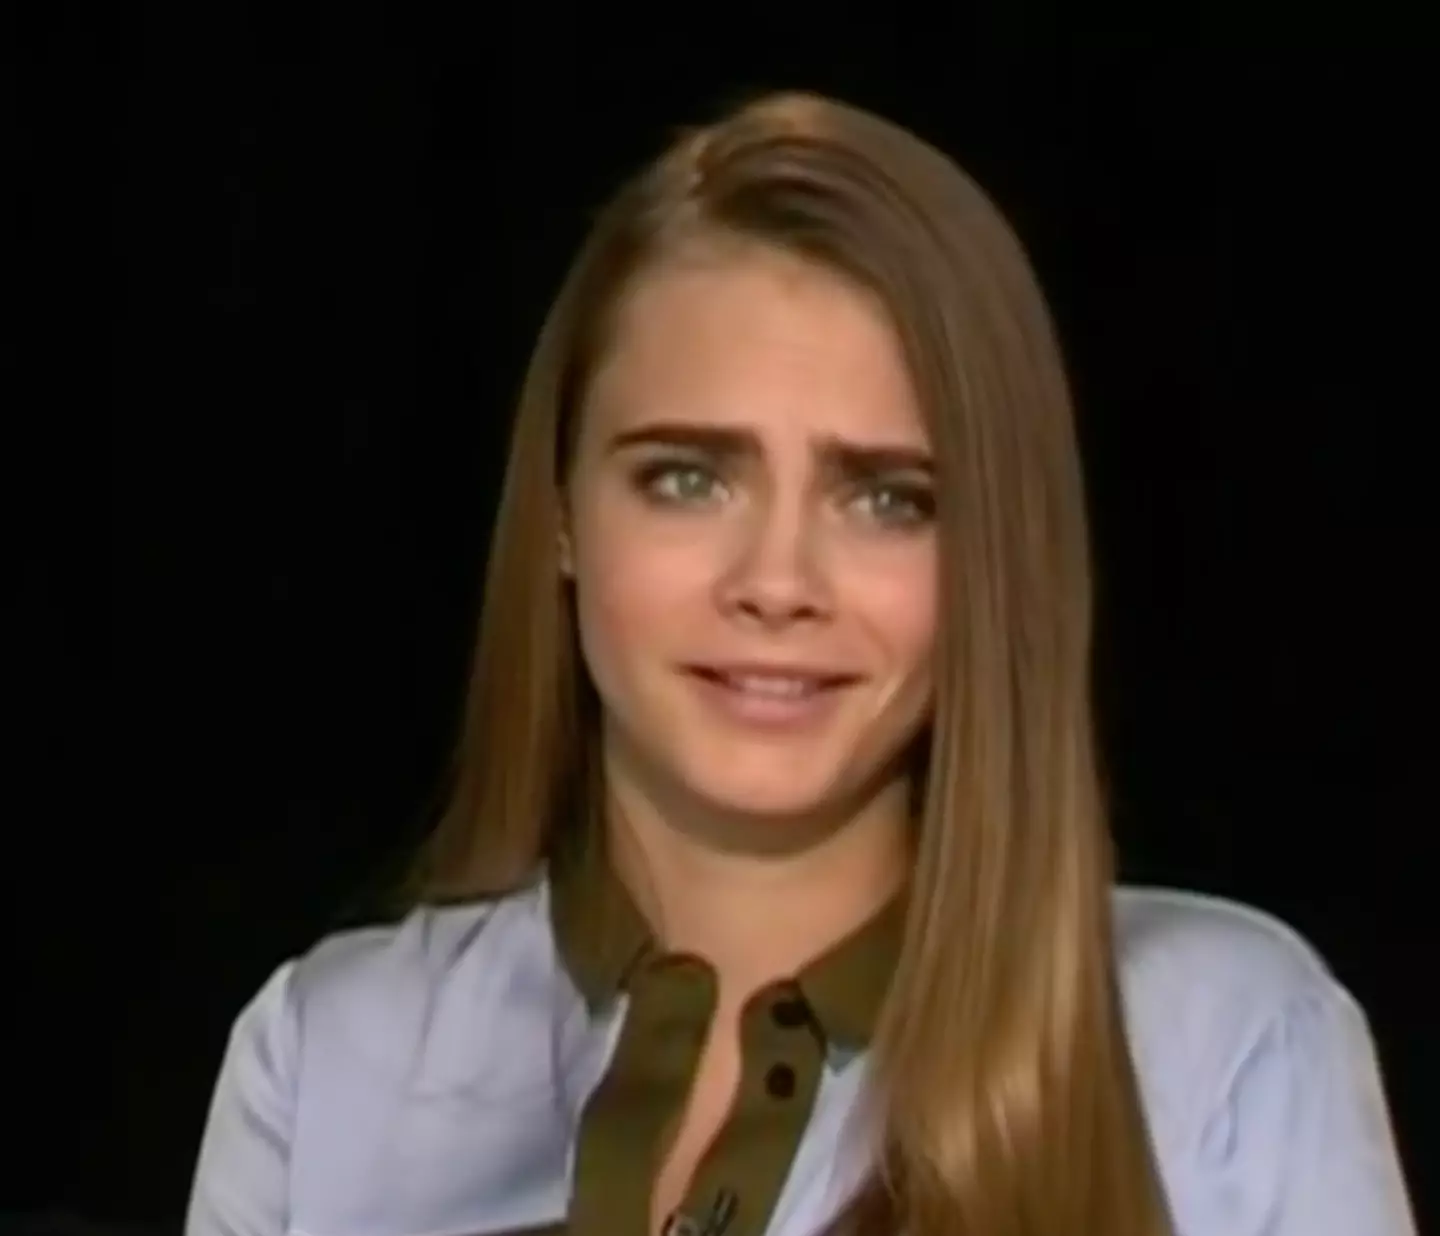 Cara responded drily to the questions.